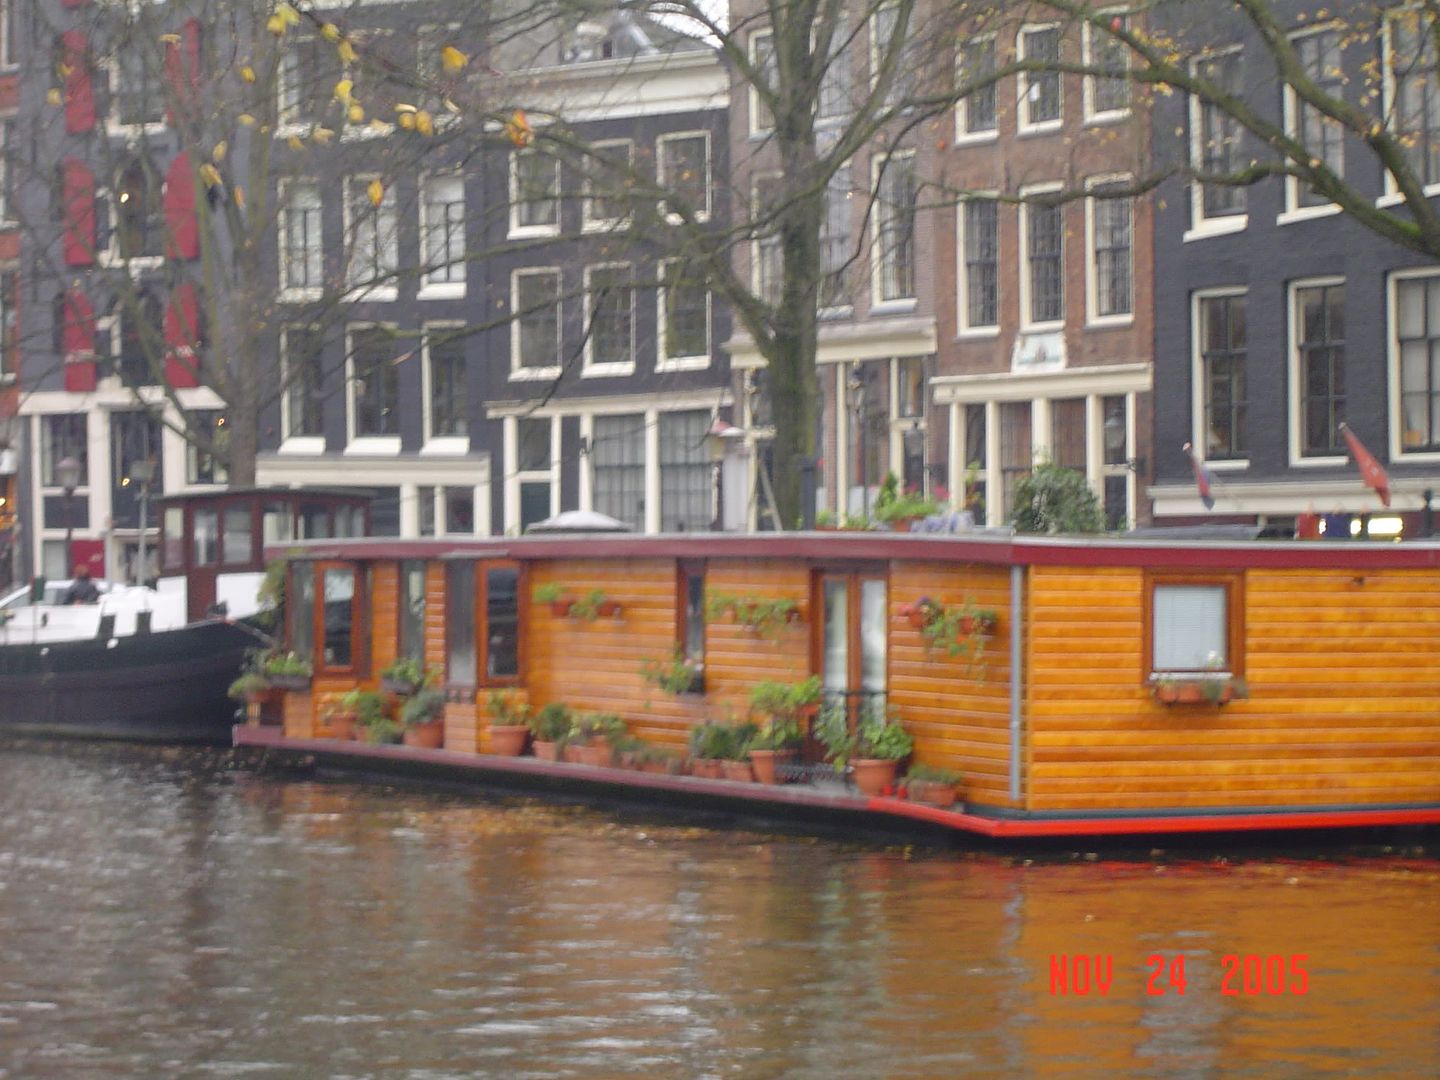 Houseboat Pictures, Images and Photos